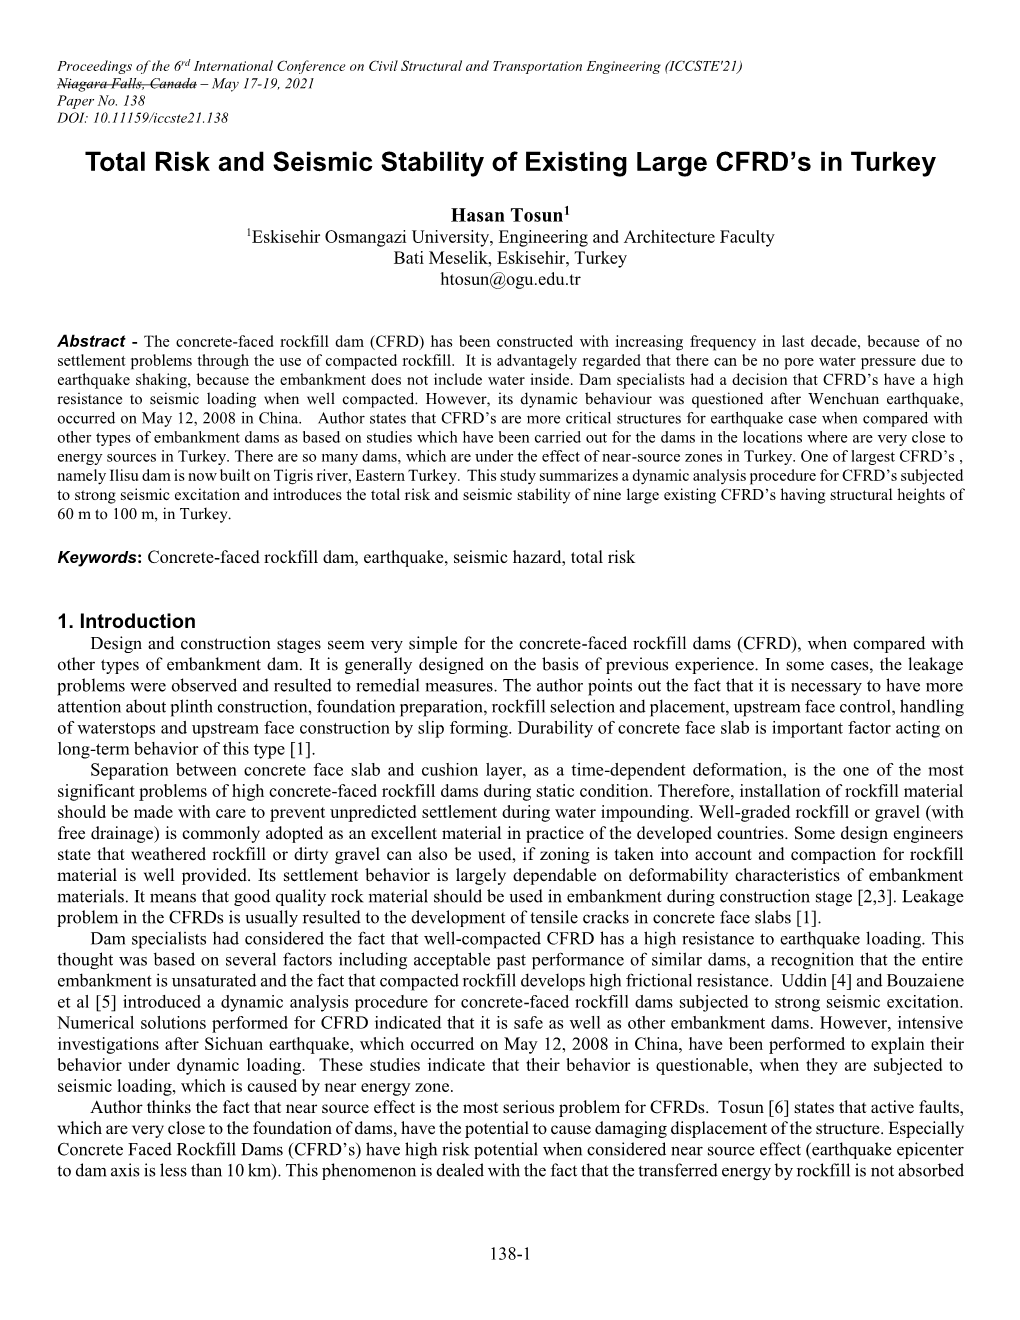 Total Risk and Seismic Stability of Existing Large CFRD's in Turkey